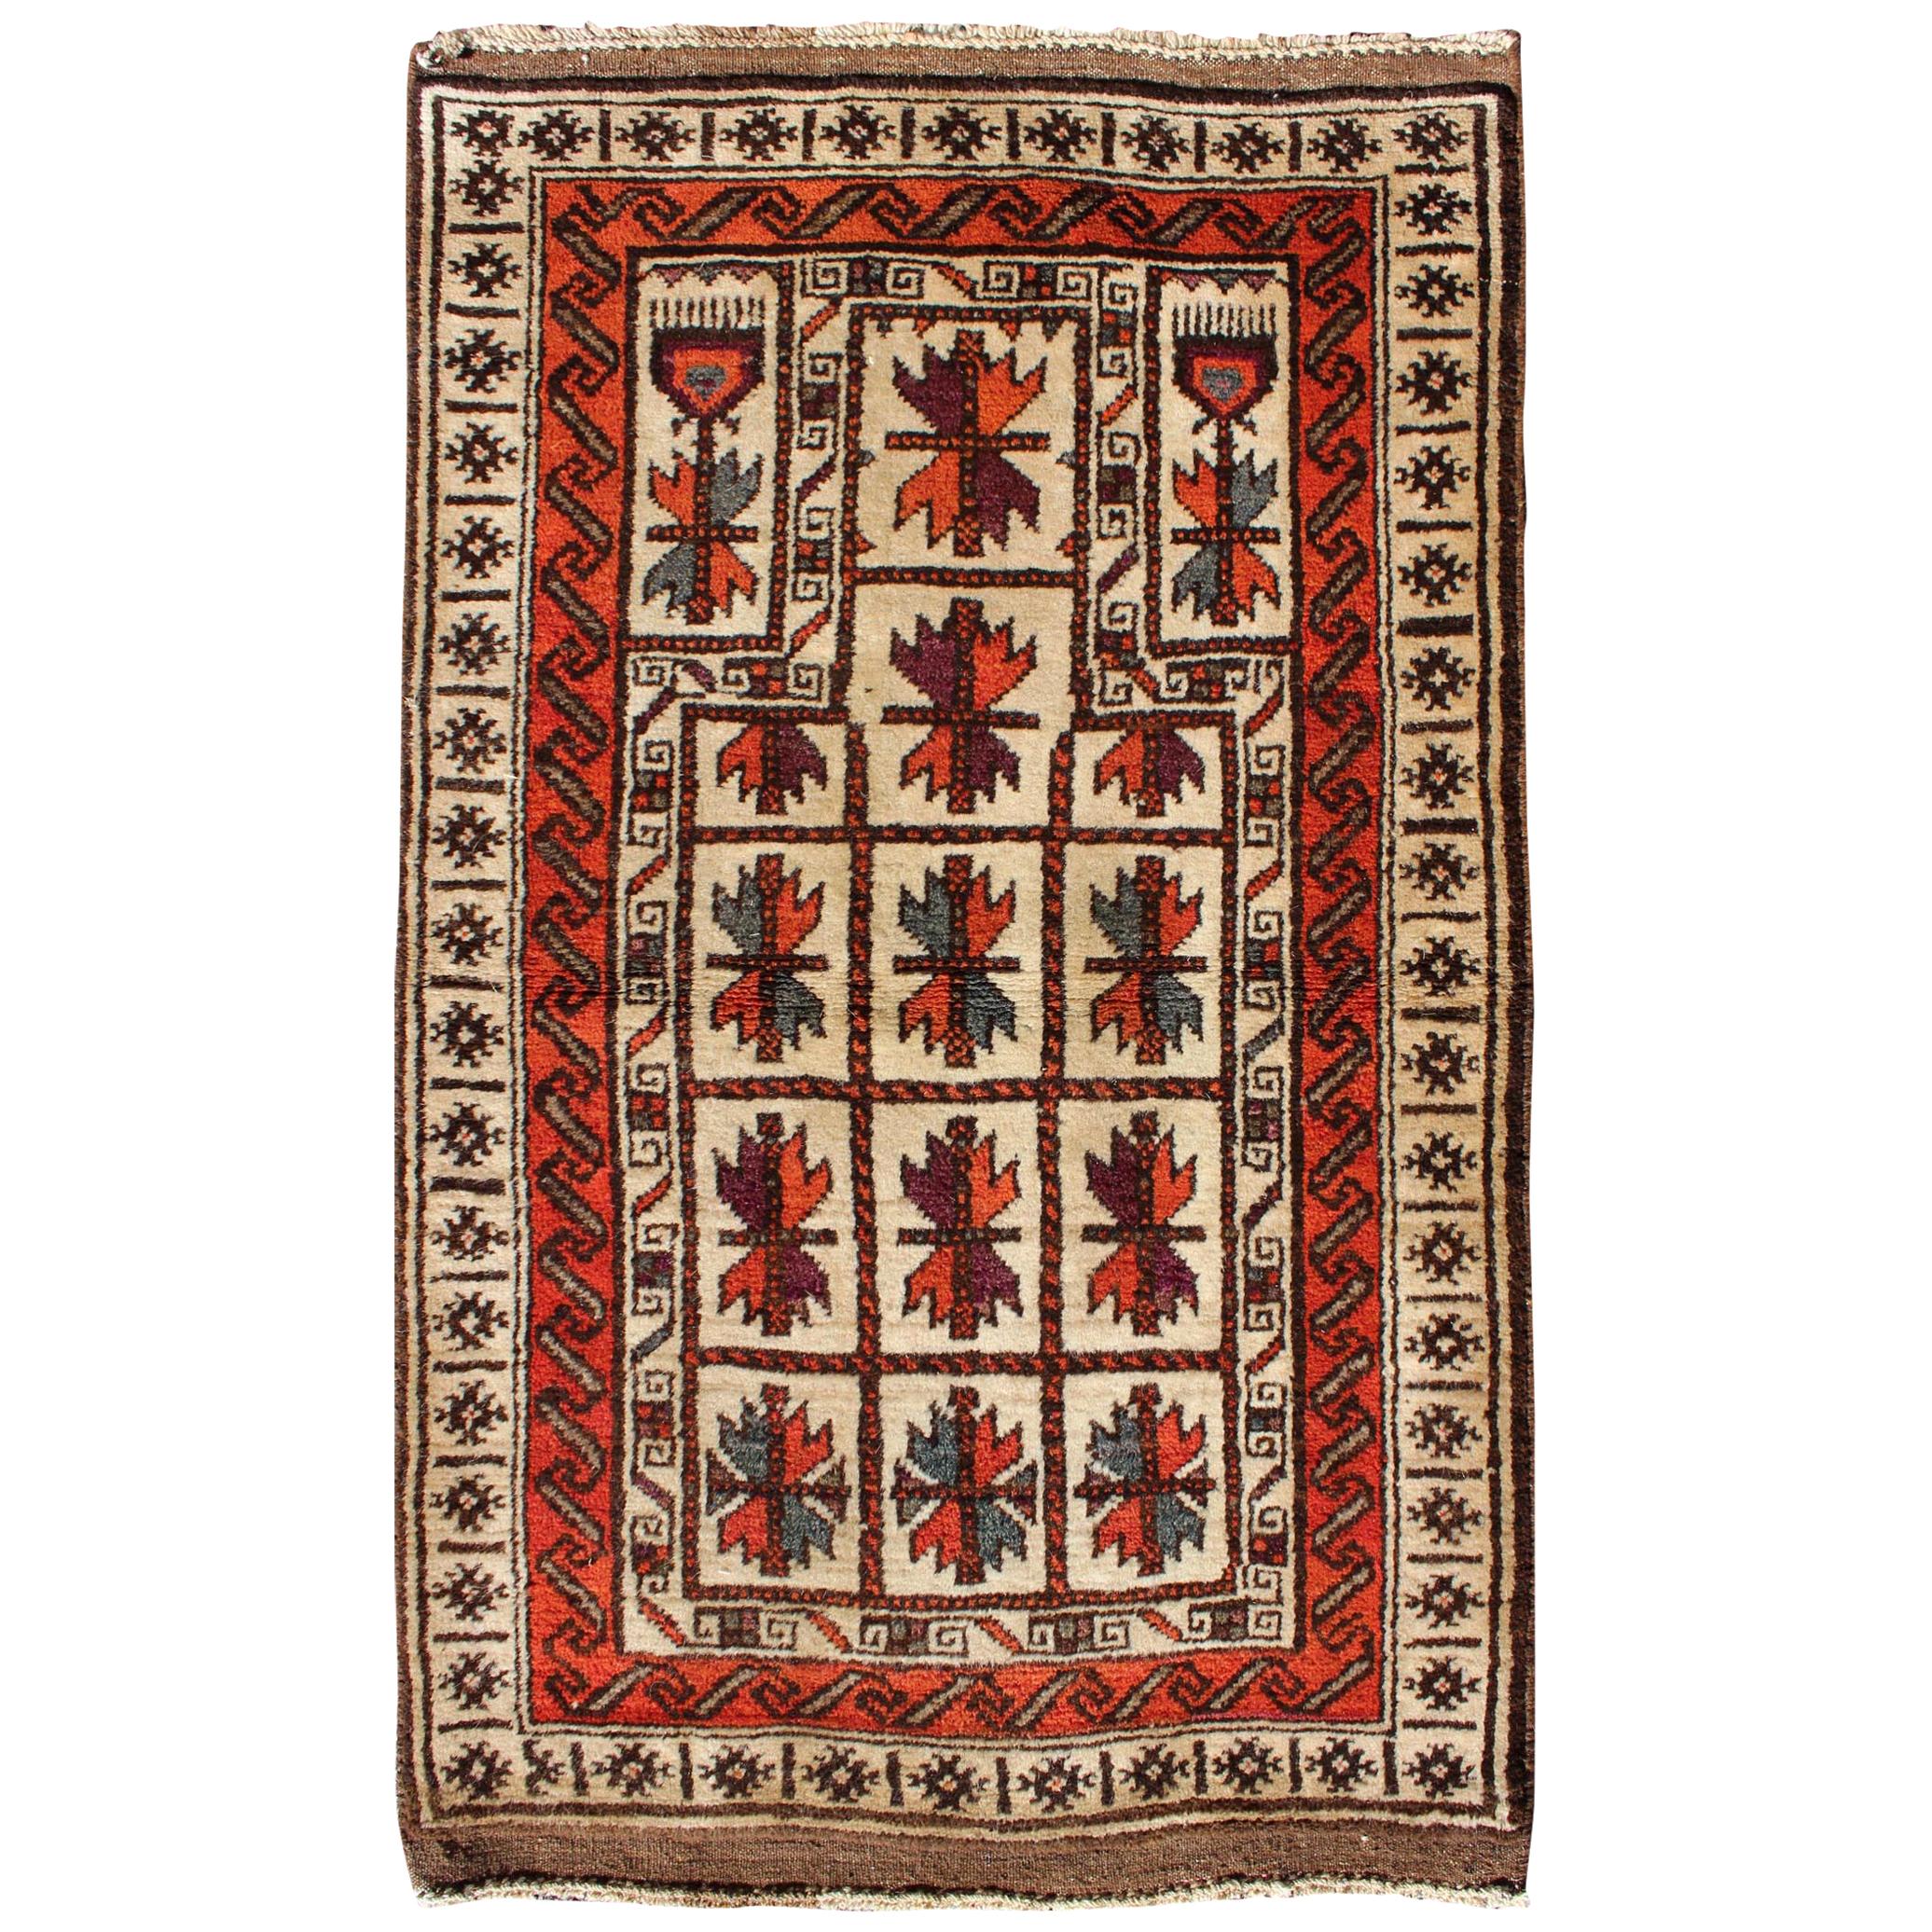 Midcentury Vintage Beluch Rug with All-Over Diamond Pattern in Red and Charcoal